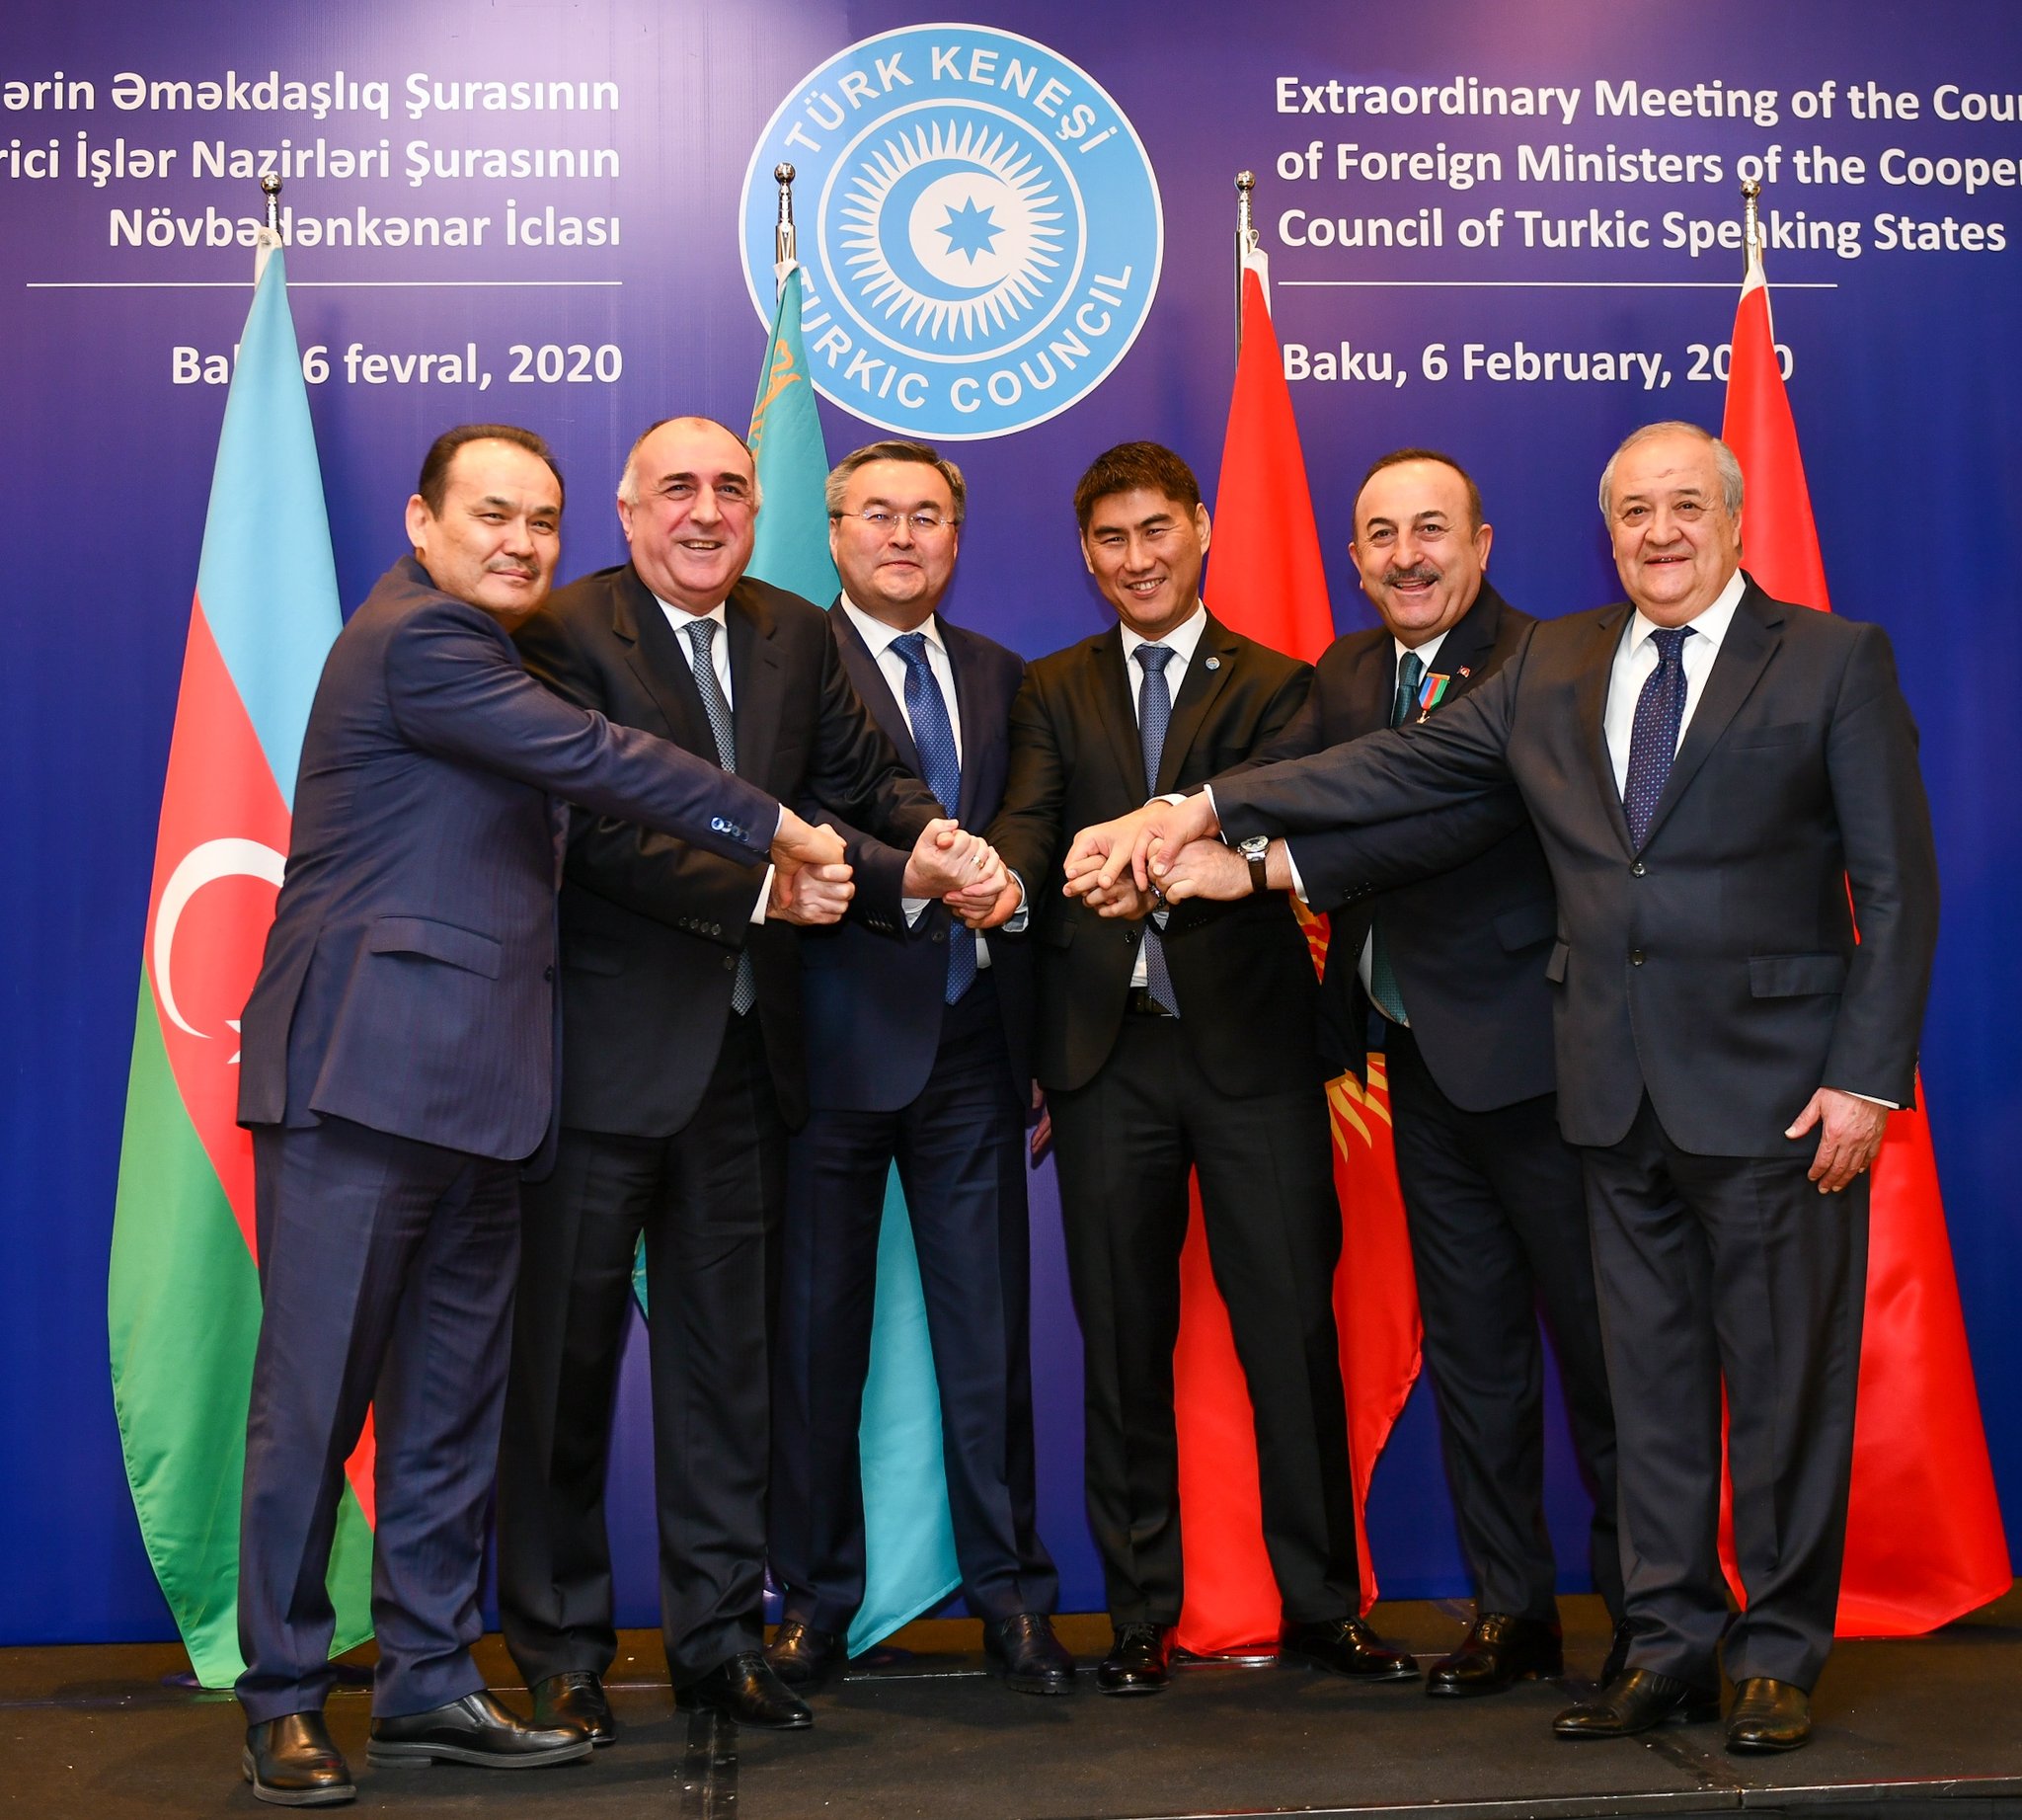 Extraordinary meeting of Turkic Council members' foreign ministers takes place in Baku